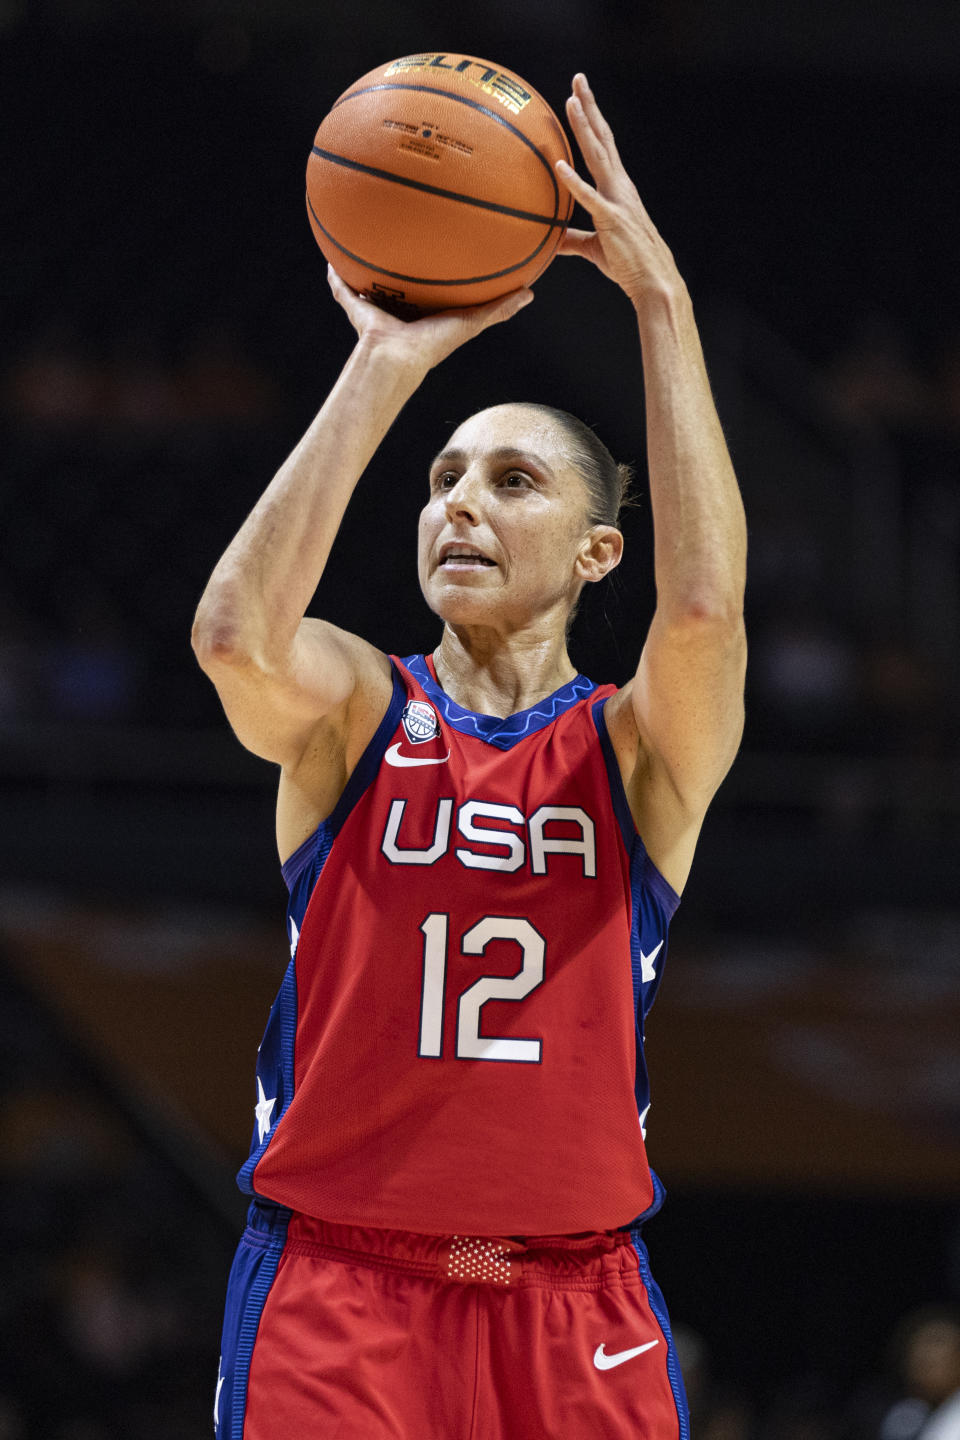 Team USA guard Diana Taurasi (12) looks to shoot a free throw during the first half of an NCAA college basketball exhibition game against Tennessee, Sunday, Nov. 5, 2023, in Knoxville, Tenn. (AP Photo/Wade Payne)